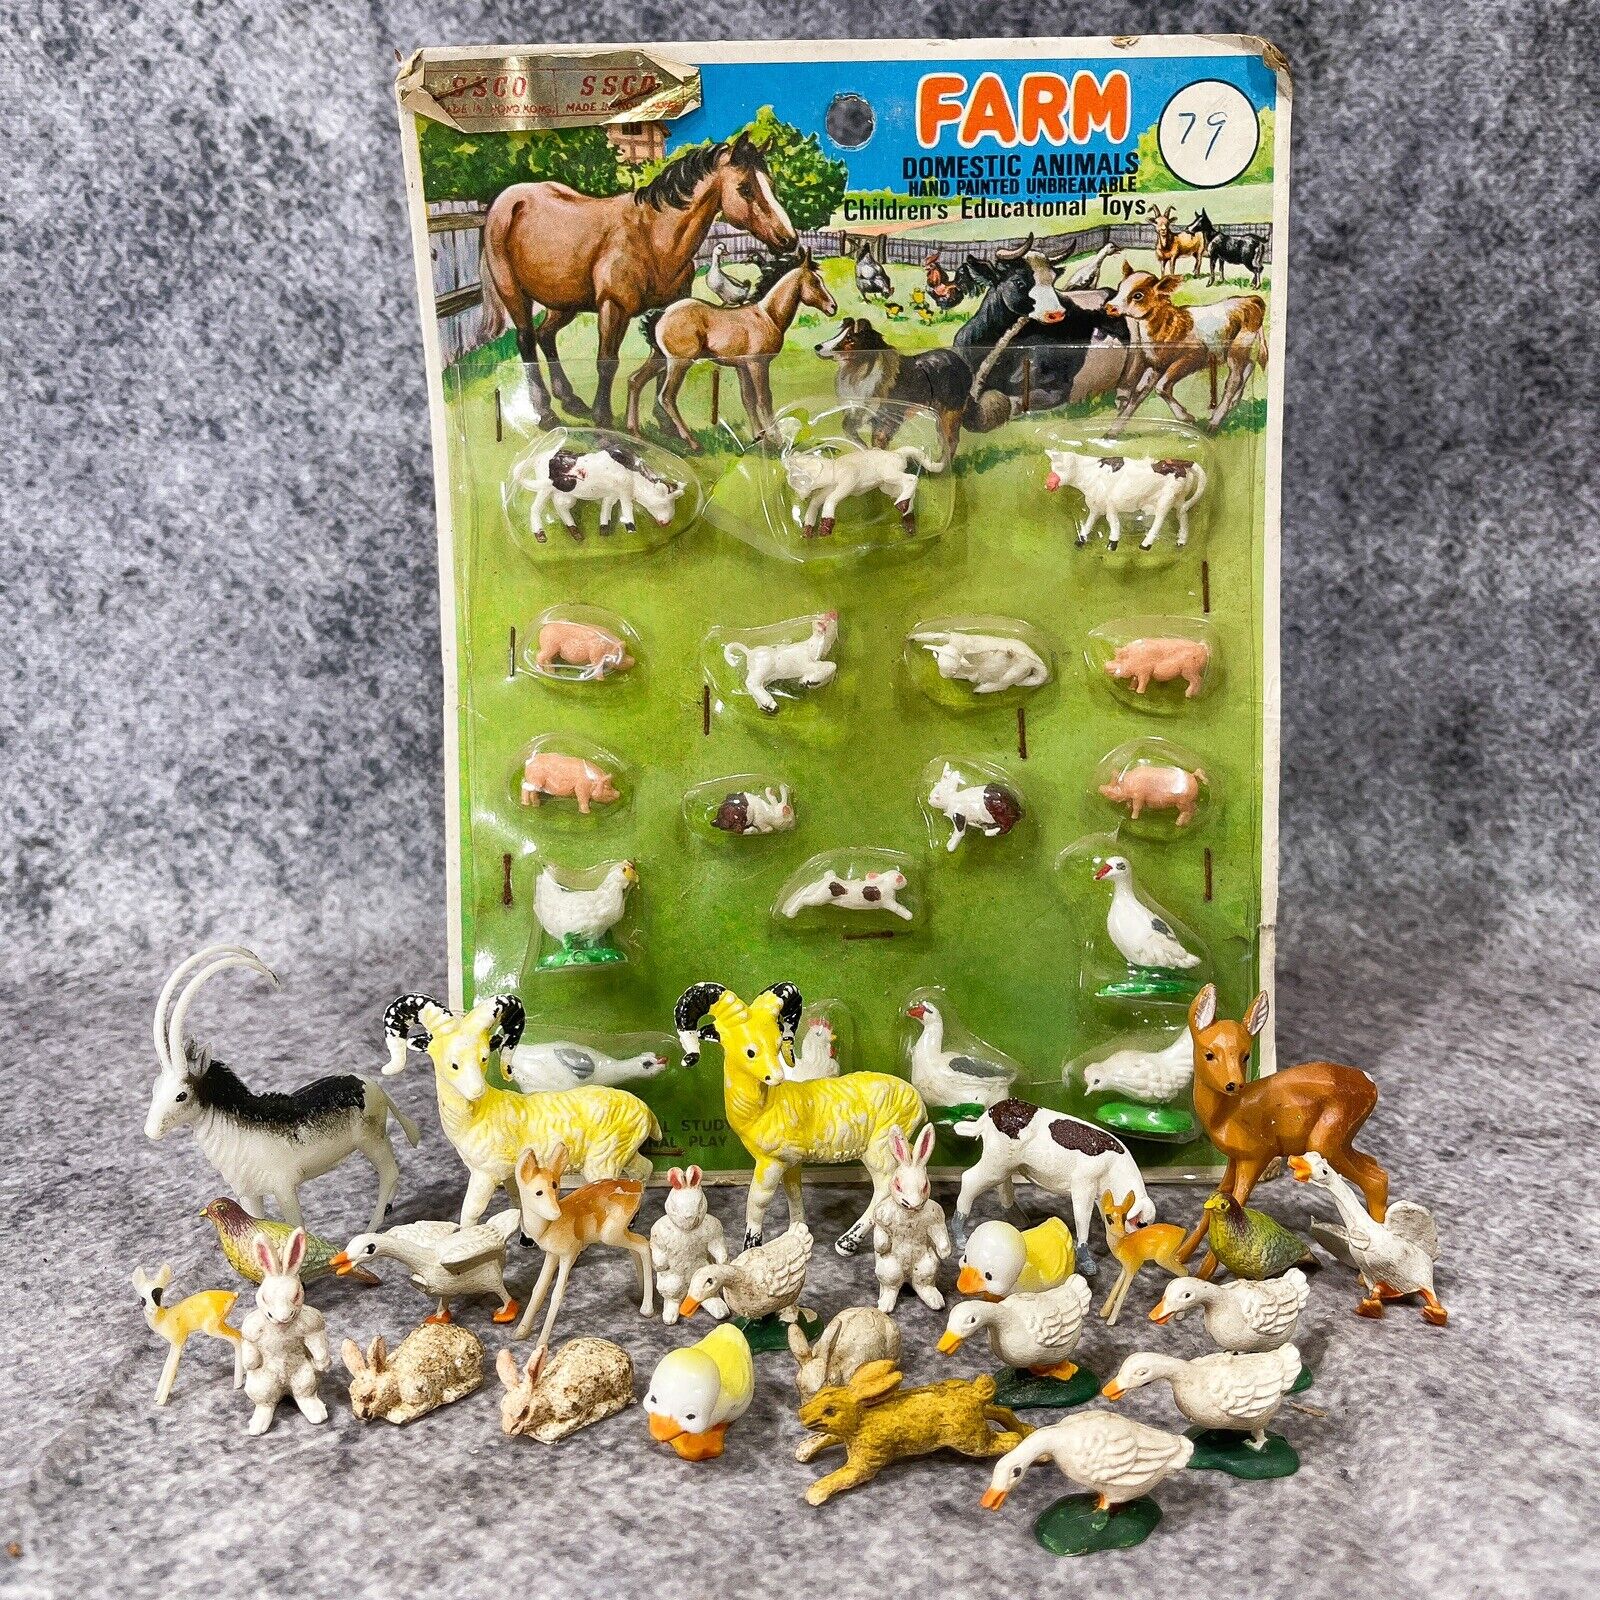 Lot of 42 Vintage Miniature Farm Animal Plastic Figurines Made in Hong Kong